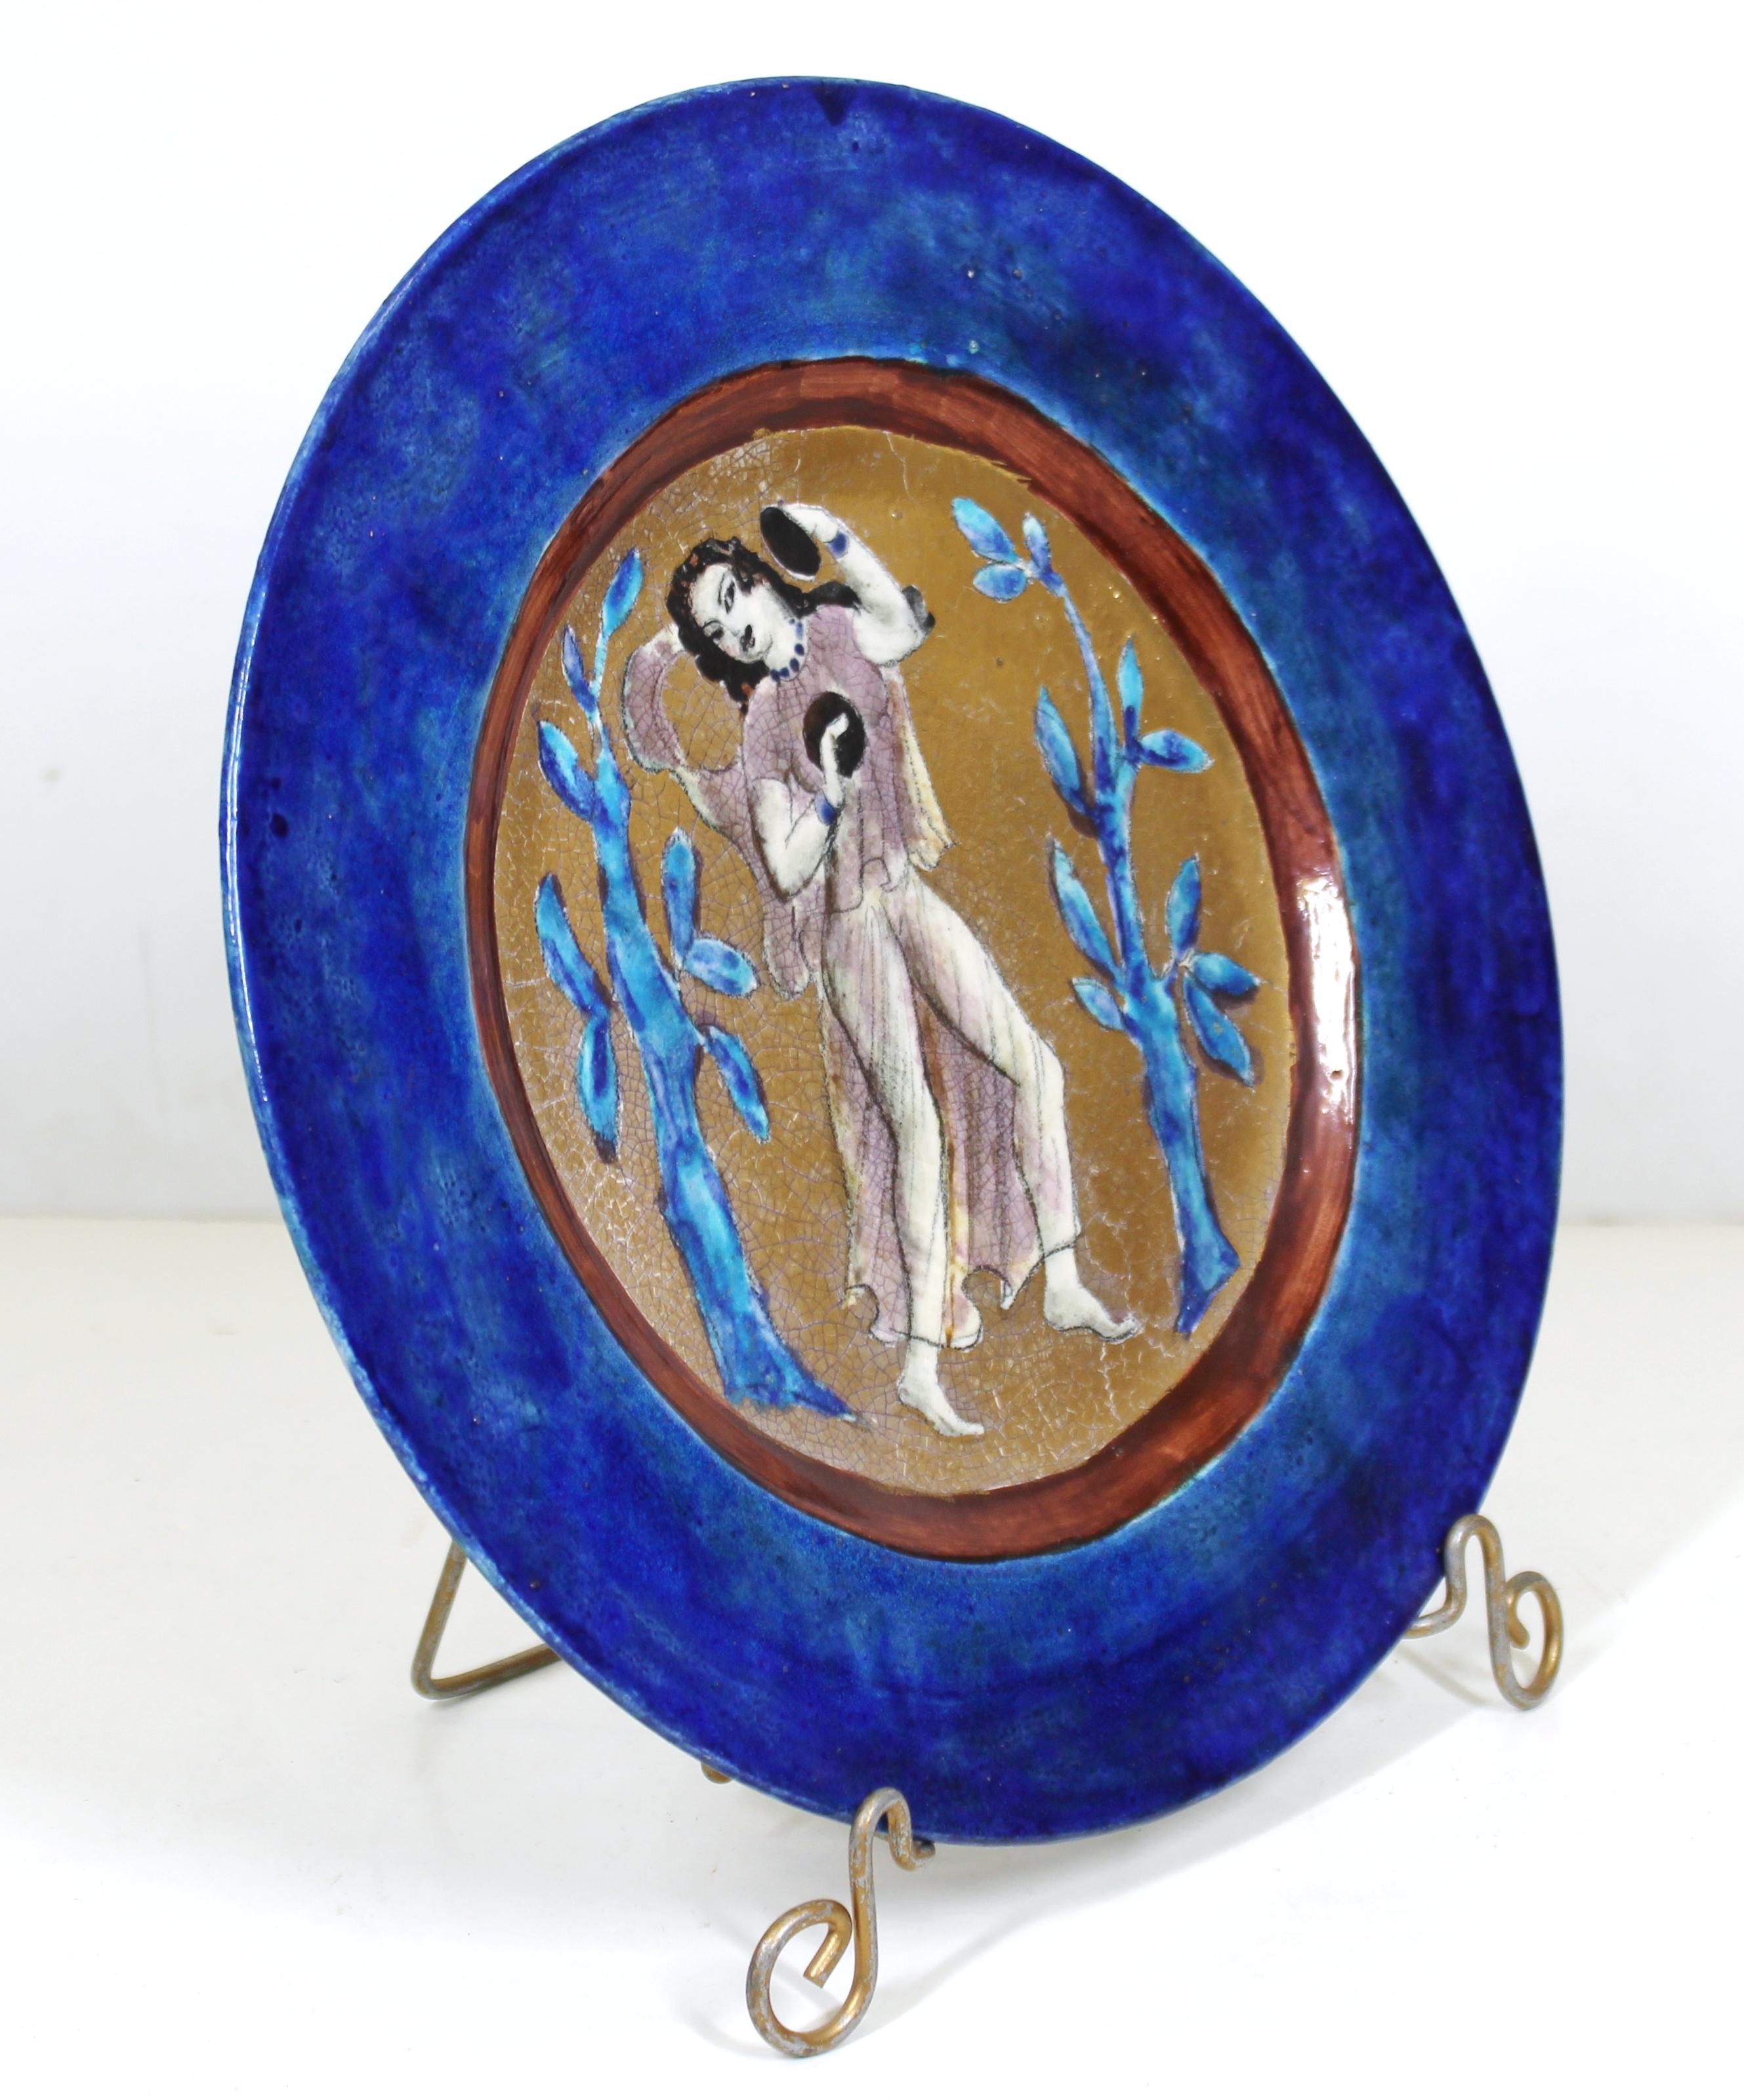 Edith Varian Cockcroft Art Deco Ceramic Charger Plate with Exotic Dancer In Good Condition For Sale In New York, NY